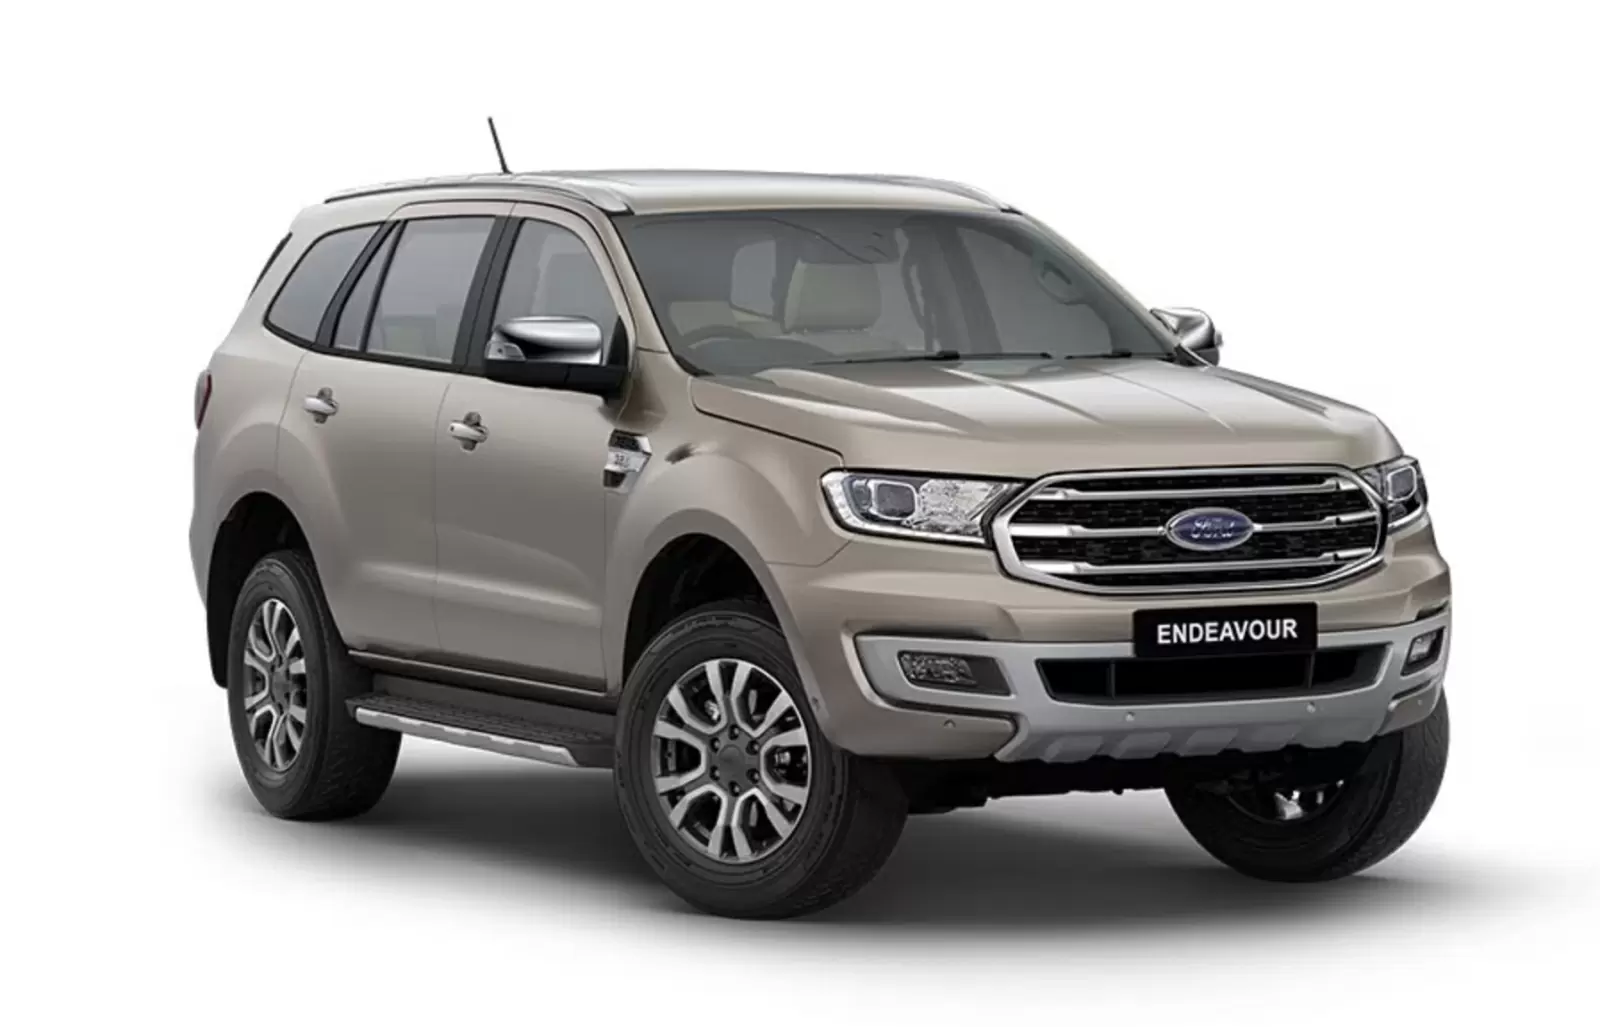 Ford Endeavor can enter the Indian market with these major changes, read updated details here